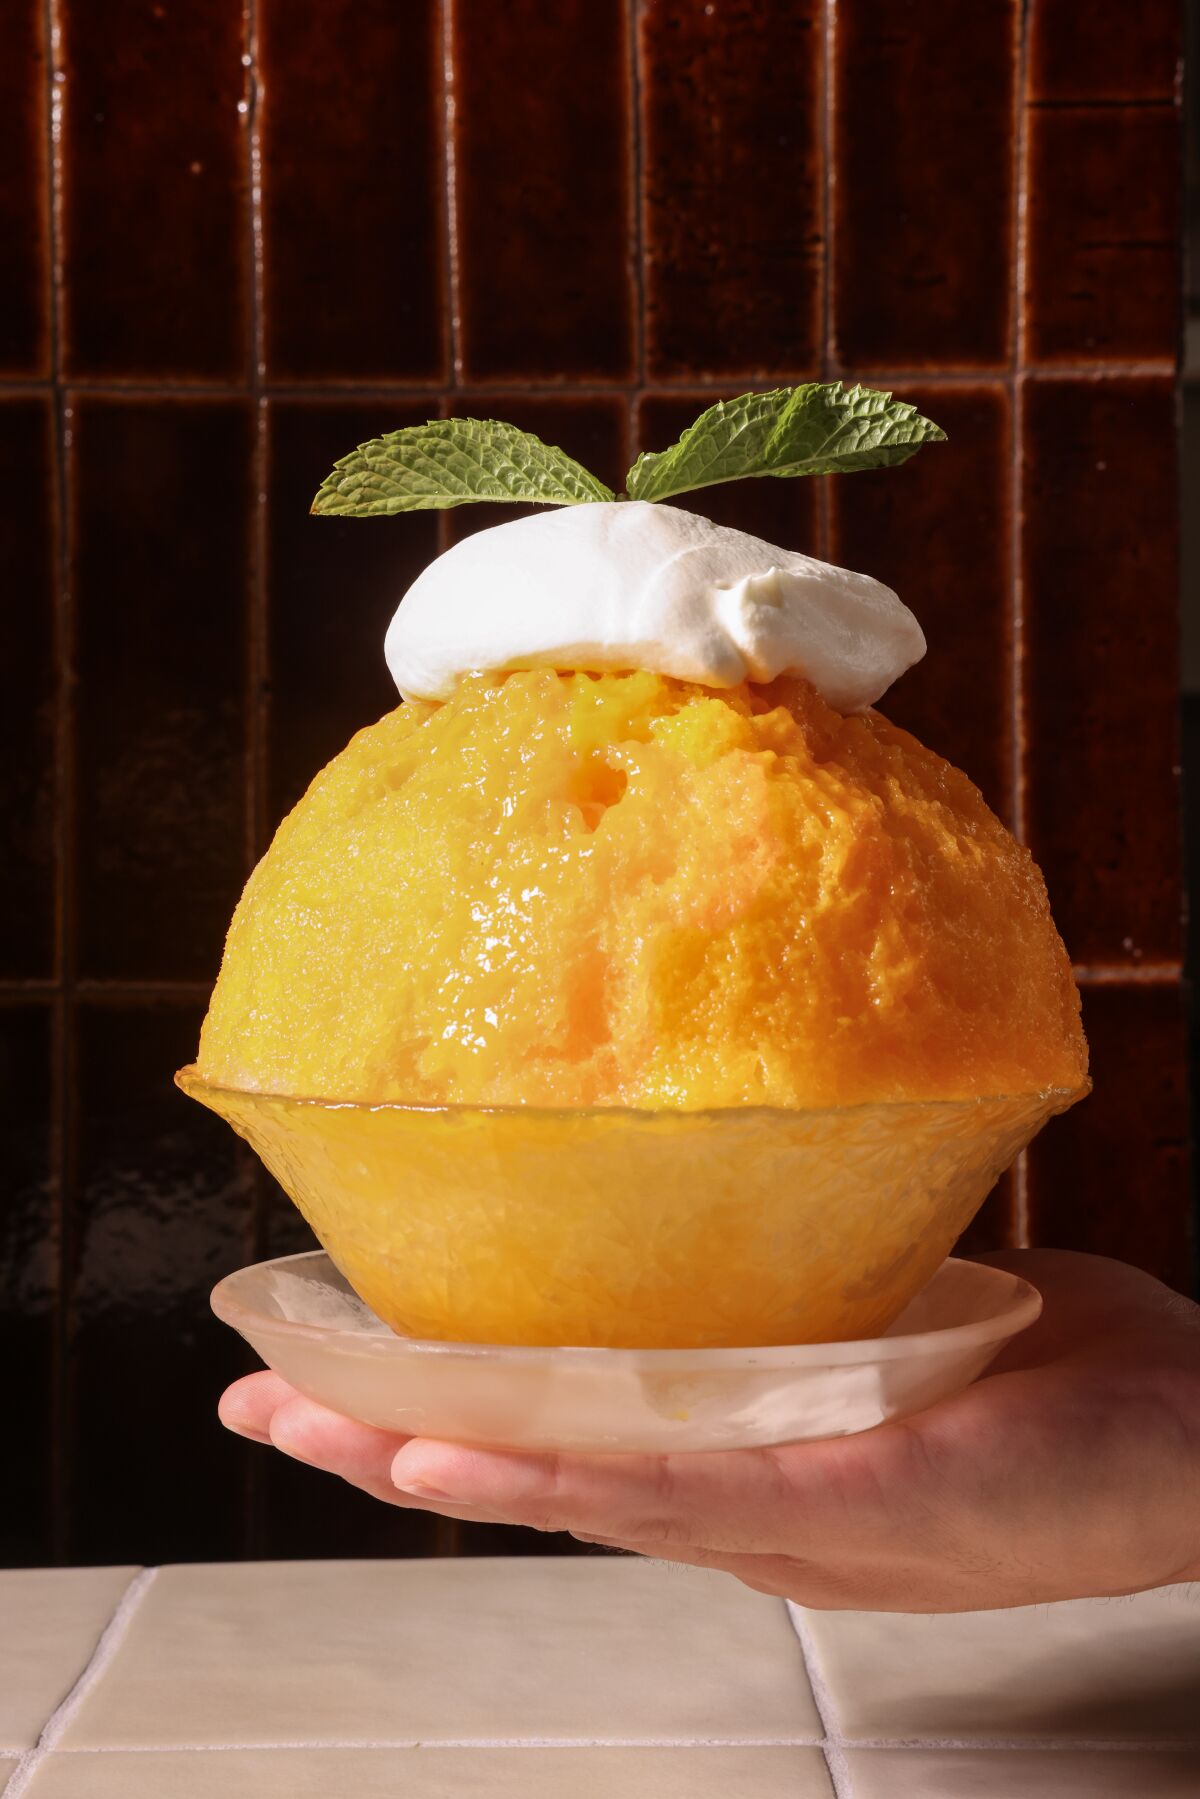 A mango-flavored shaved ice in a bowl